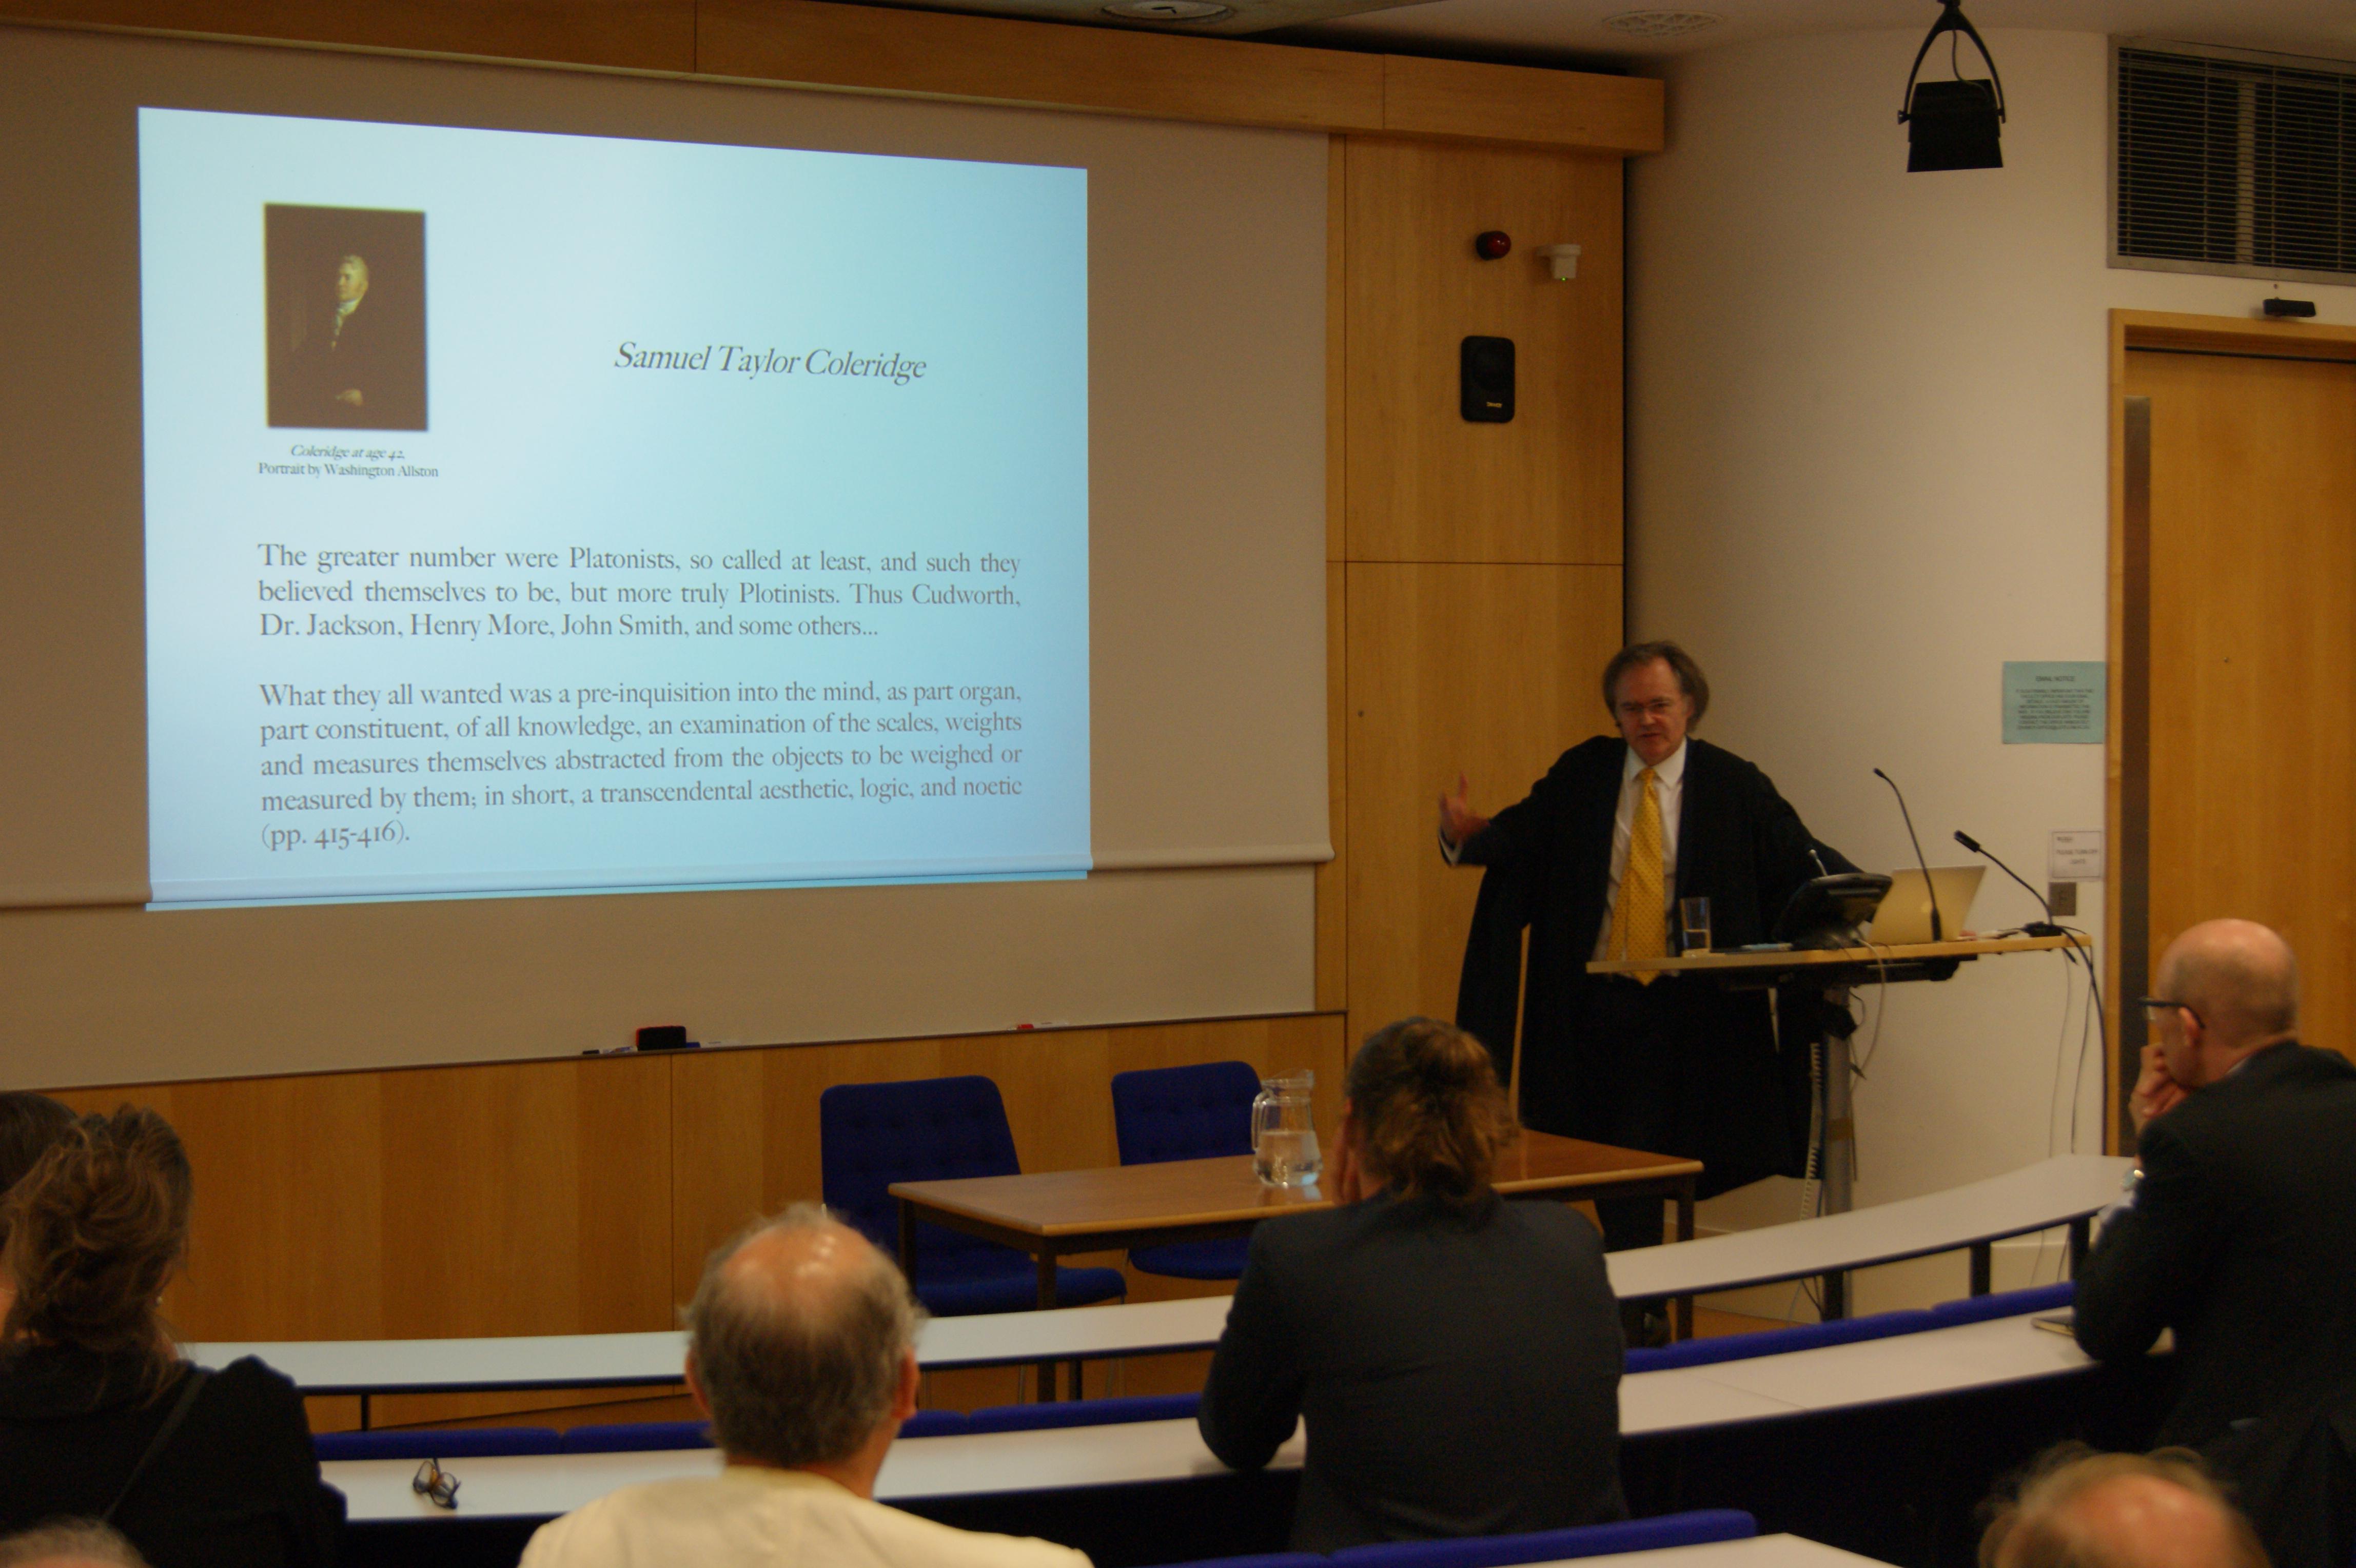 Prof. Hedley’s Inaugural Lecture: ‘Devout Contemplation and Sublime Fancy’: The Cambrige Platonists and their Legacy for the Philosophy of Religion